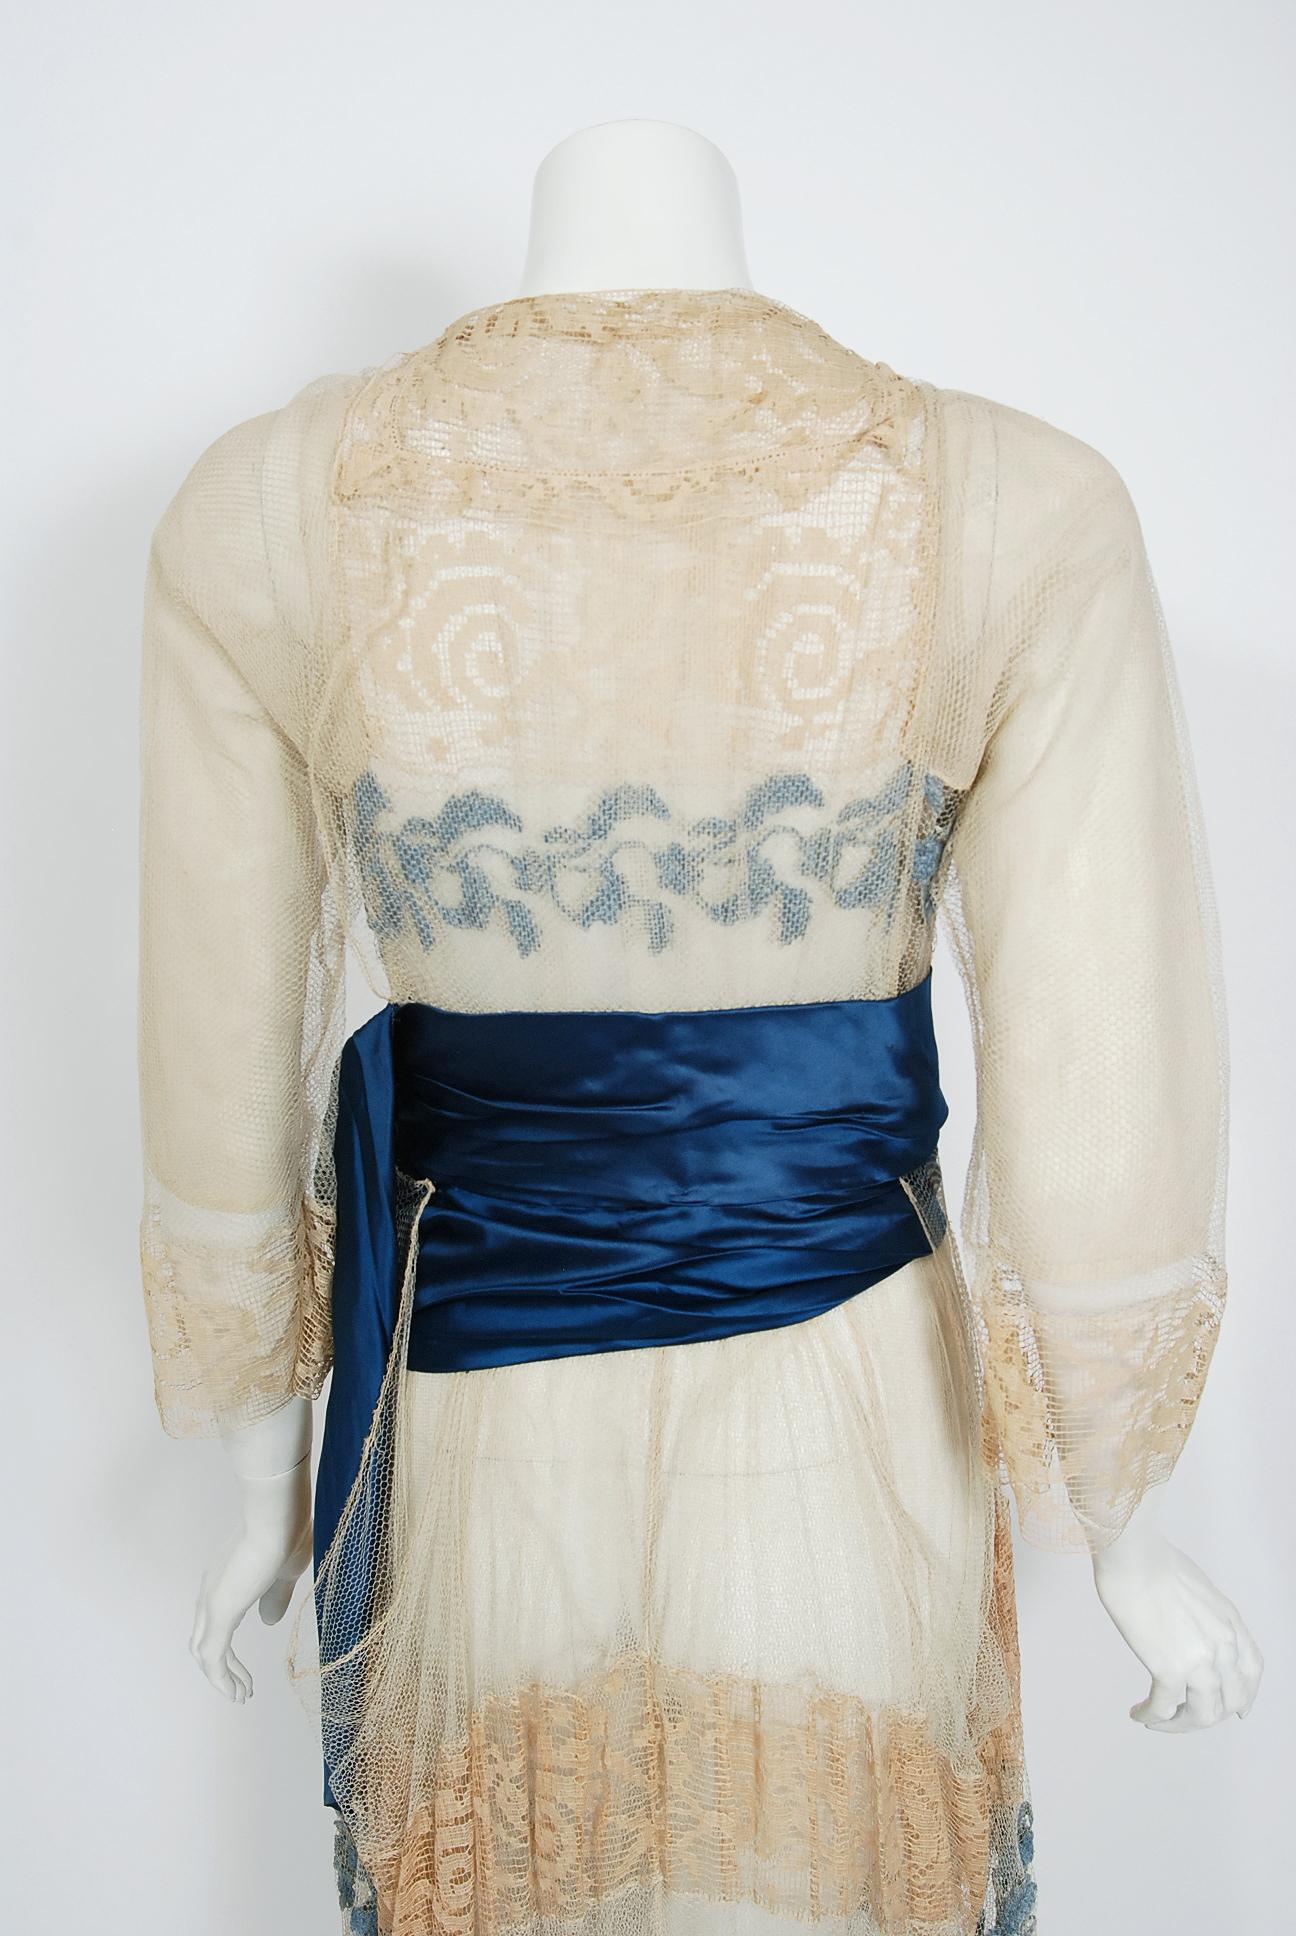 Women's Antique 1910's Julius Garfinckel Couture Beige Embroidered Net-Lace Dress Gown For Sale